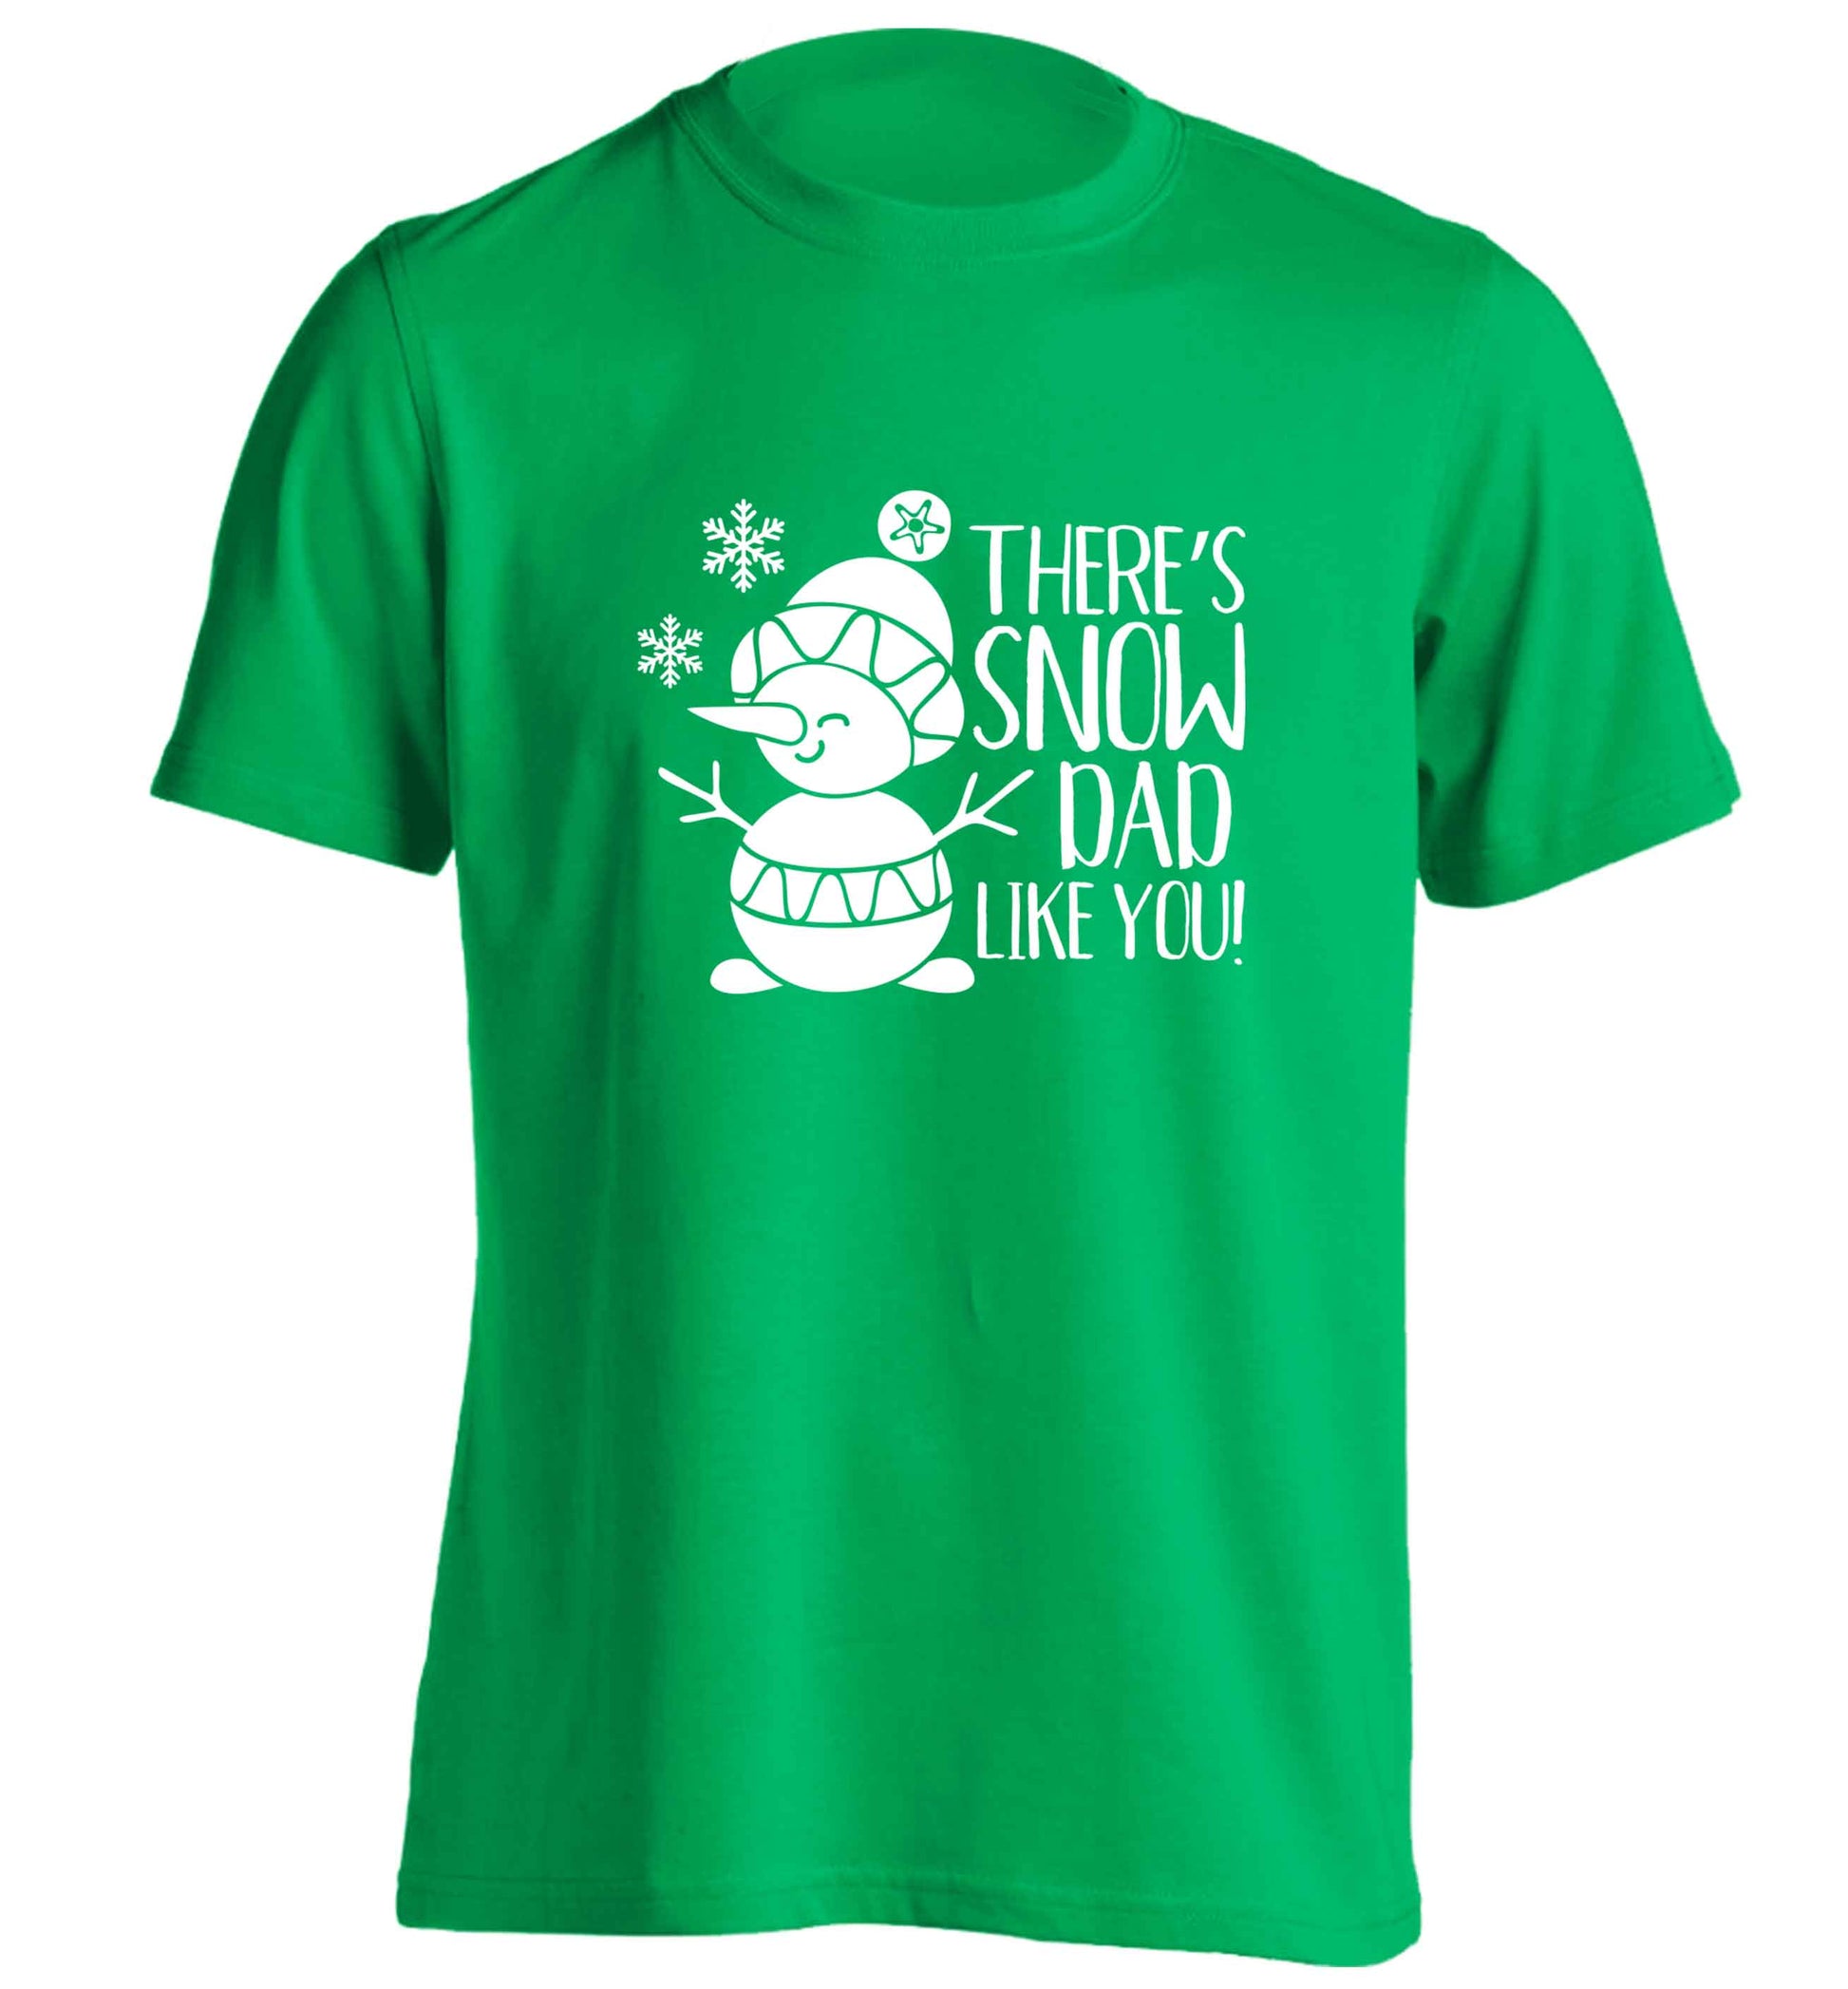 There's snow dad like you adults unisex green Tshirt 2XL